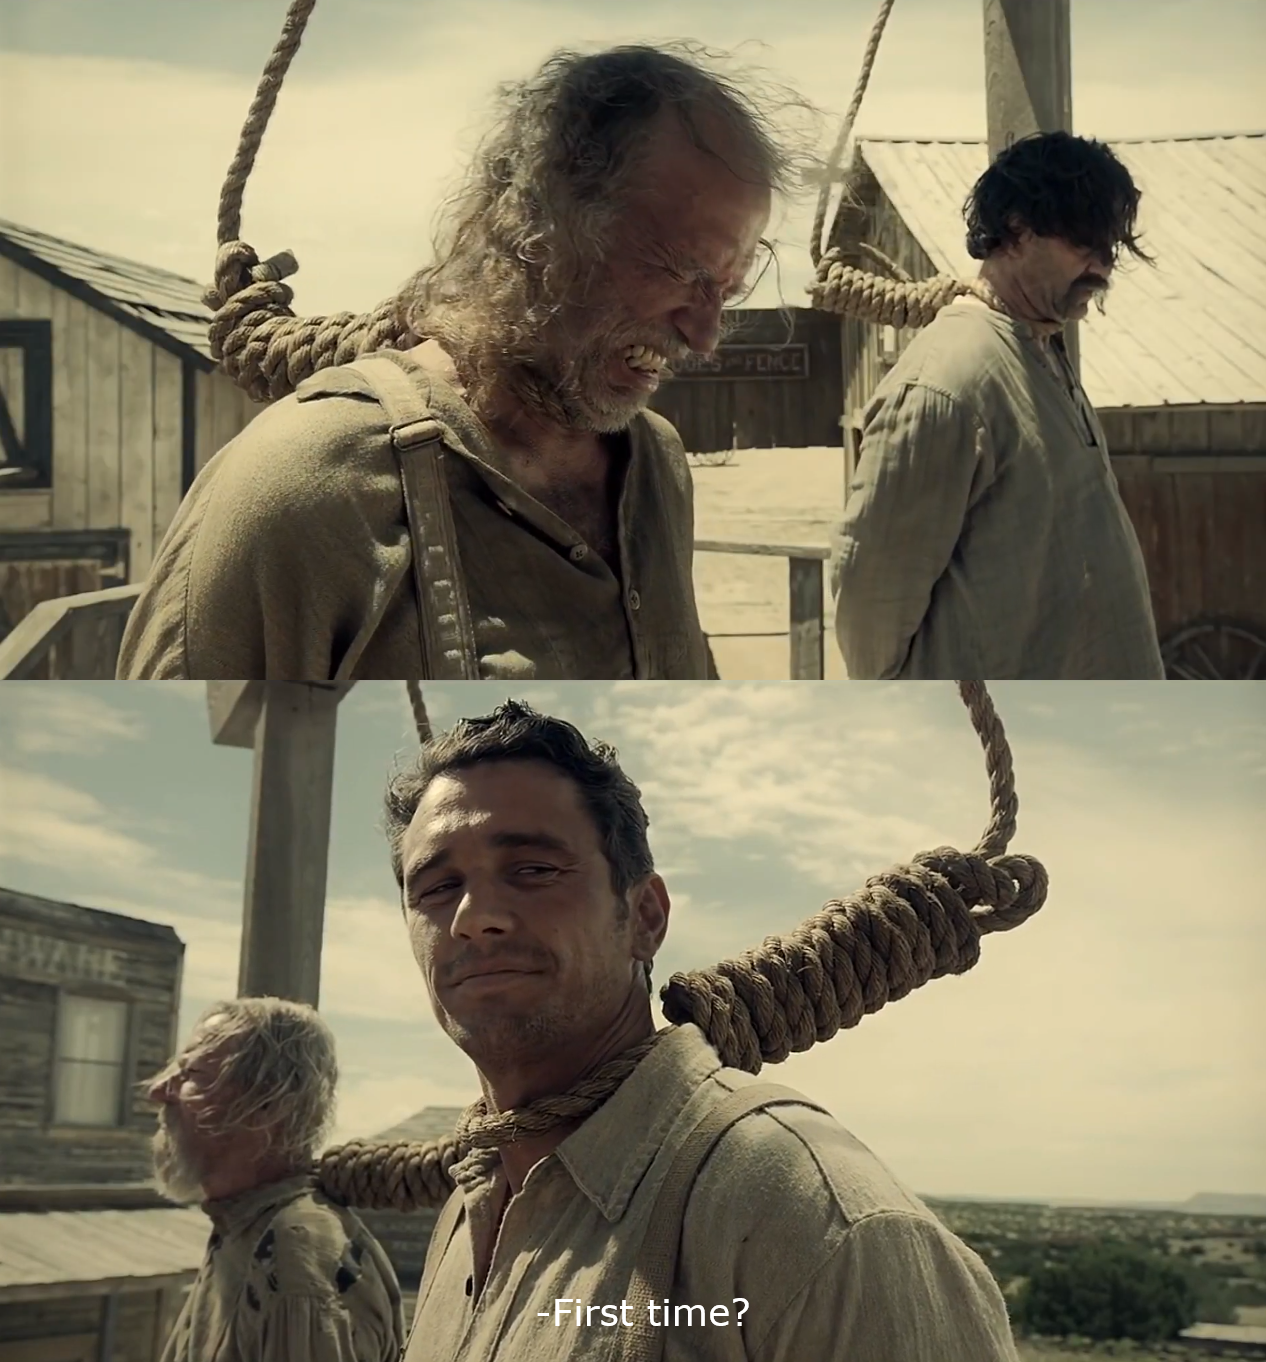 An image from movie The Ballad of Buster Scruggs. Two men are being hanged. One is weeping. The second looks at him and asks 